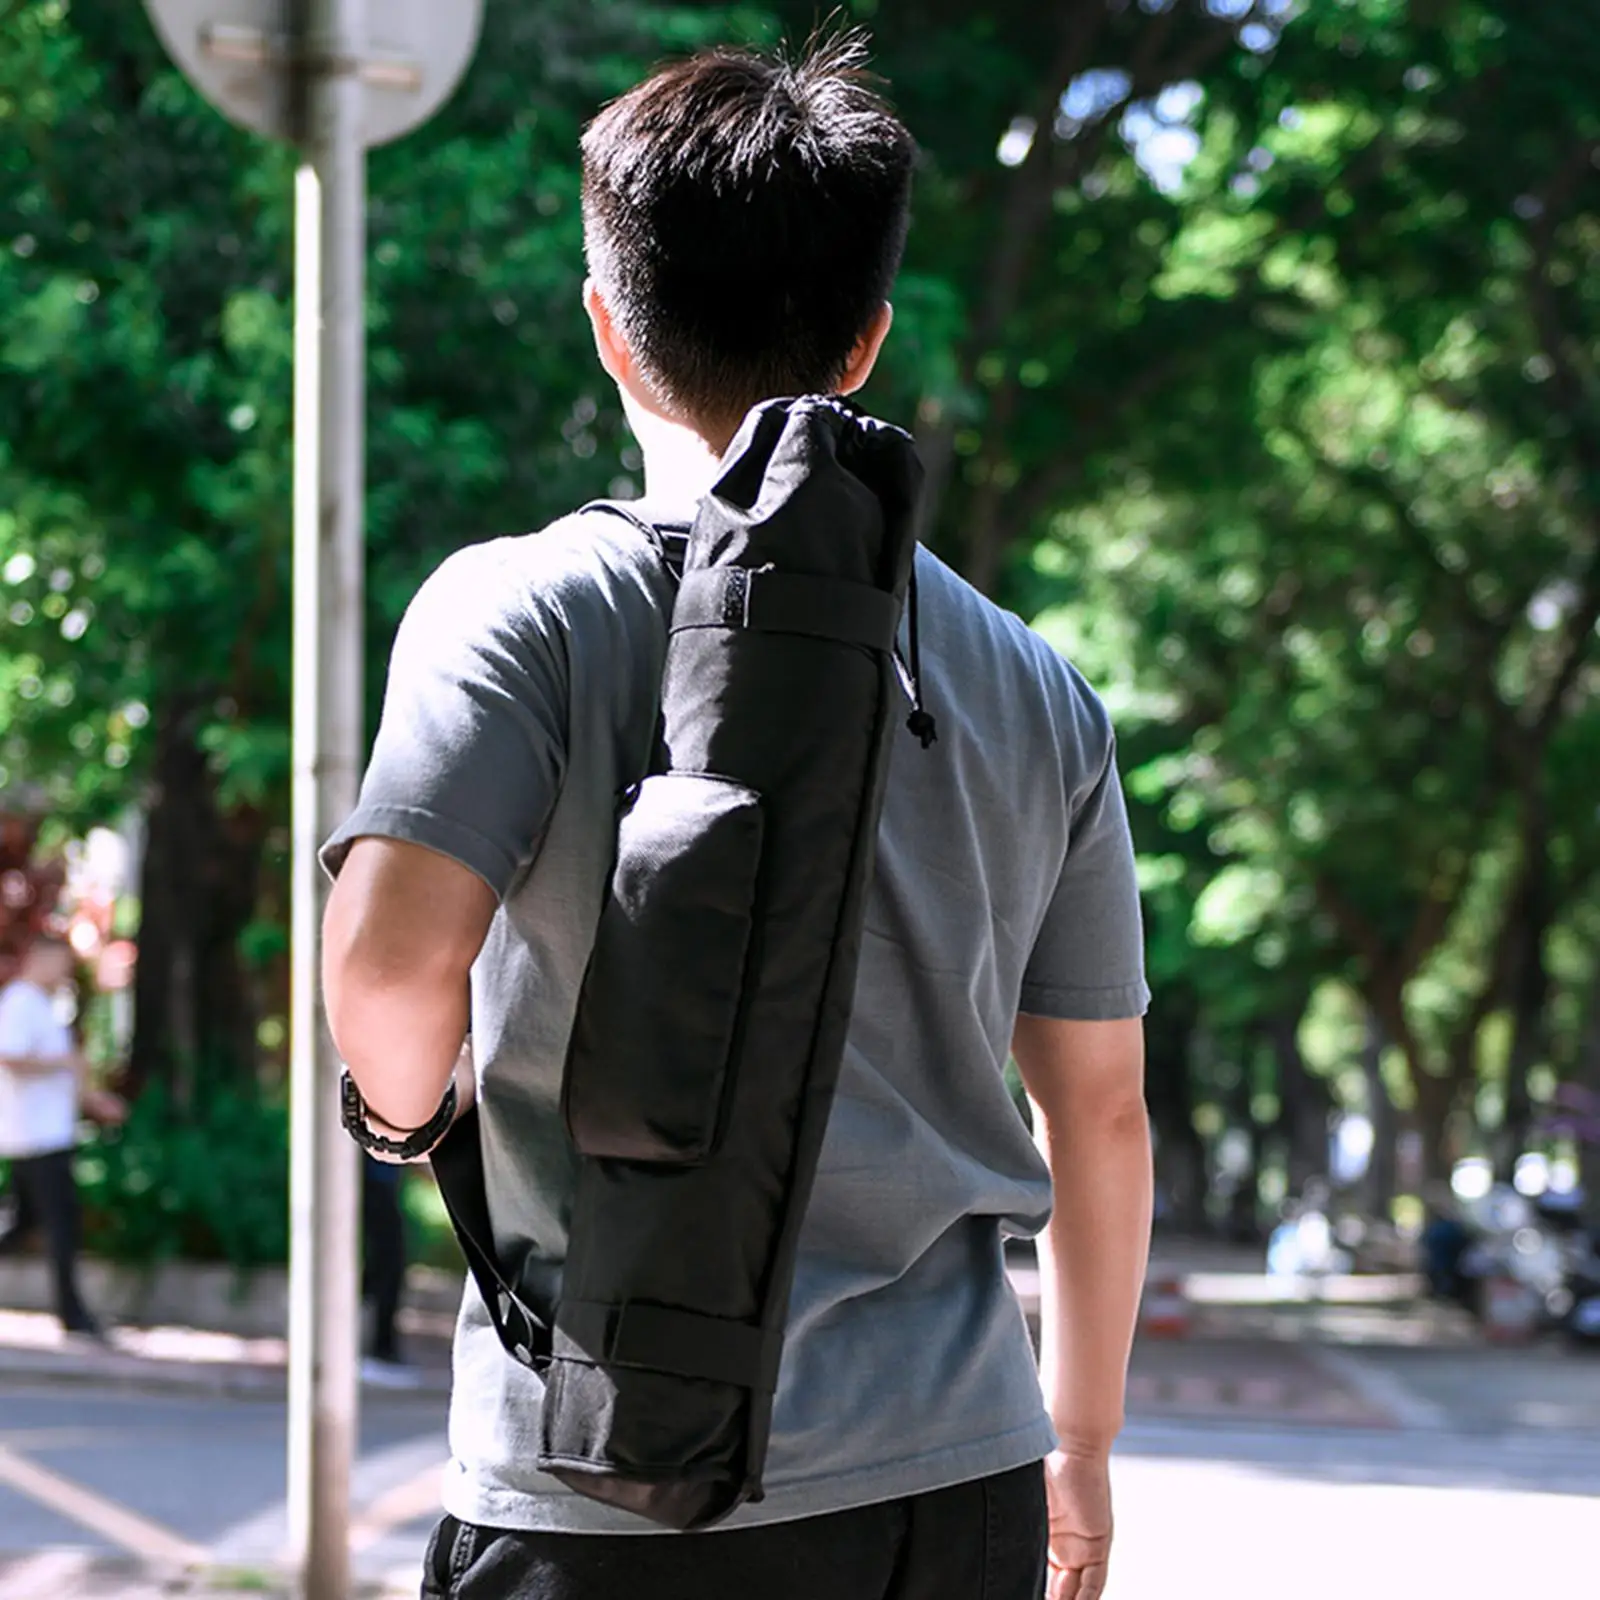 60cm Tripod Carrying Case with Strap Protected From Dust And Weather Durable